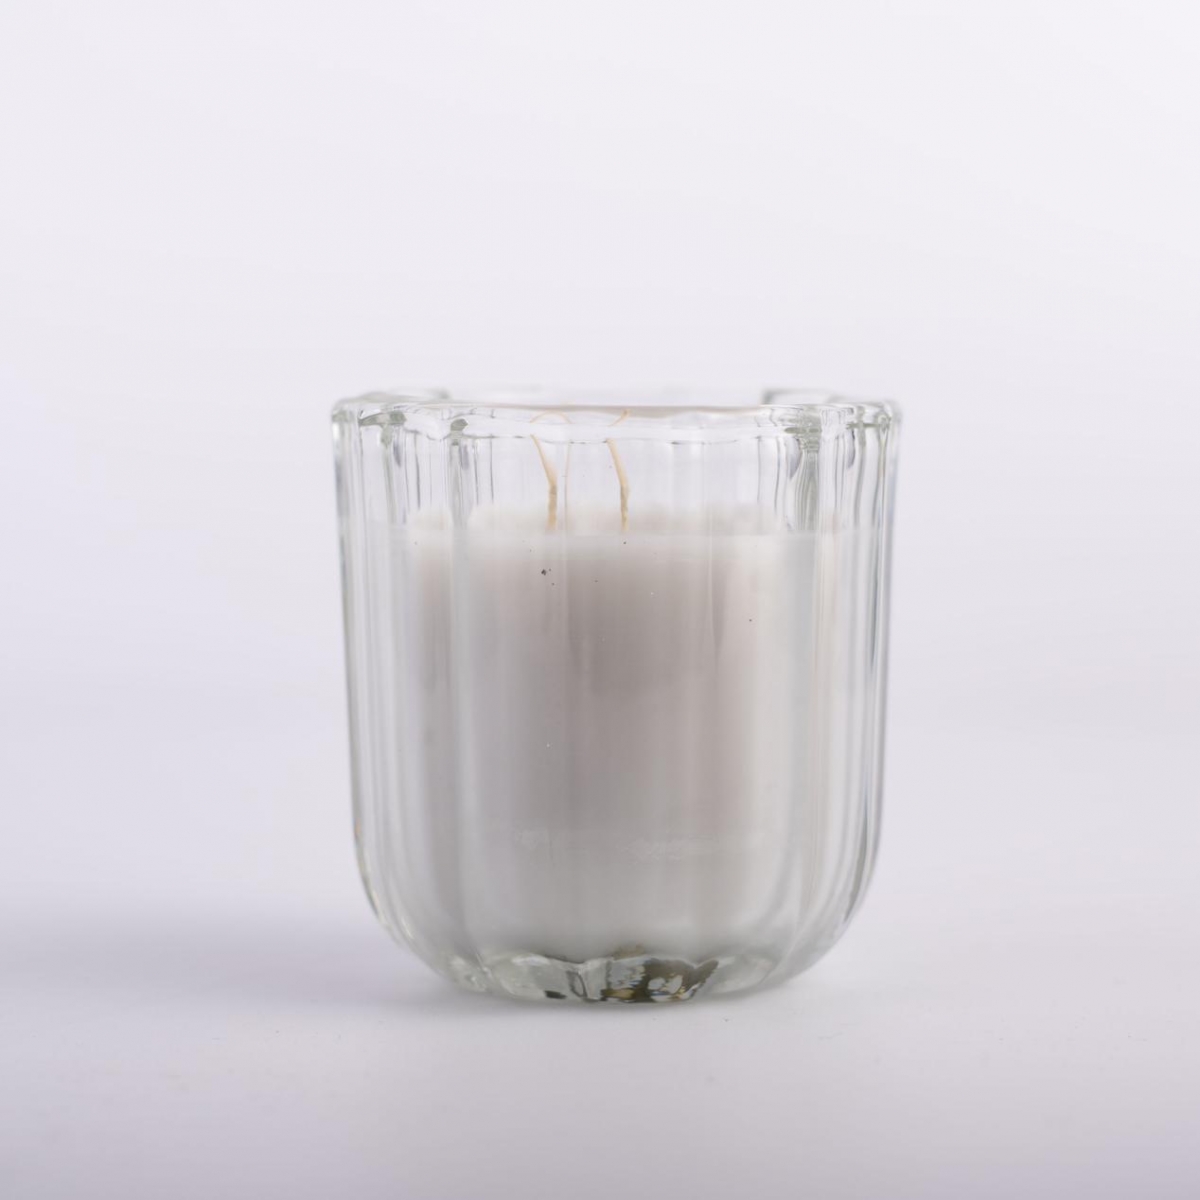 Scented Candles :Soy Wax ,Essential Oils ,Crystal Glass ,Aromatherapy Candles, China Factory ,Wholesale Price-HOWCANDLE-Candles,Scented Candles,Aromatherapy Candles,Soy Candles,Vegan Candles,Jar Candles,Pillar Candles,Candle Gift Sets,Essential Oils,Reed Diffuser,Candle Holder,